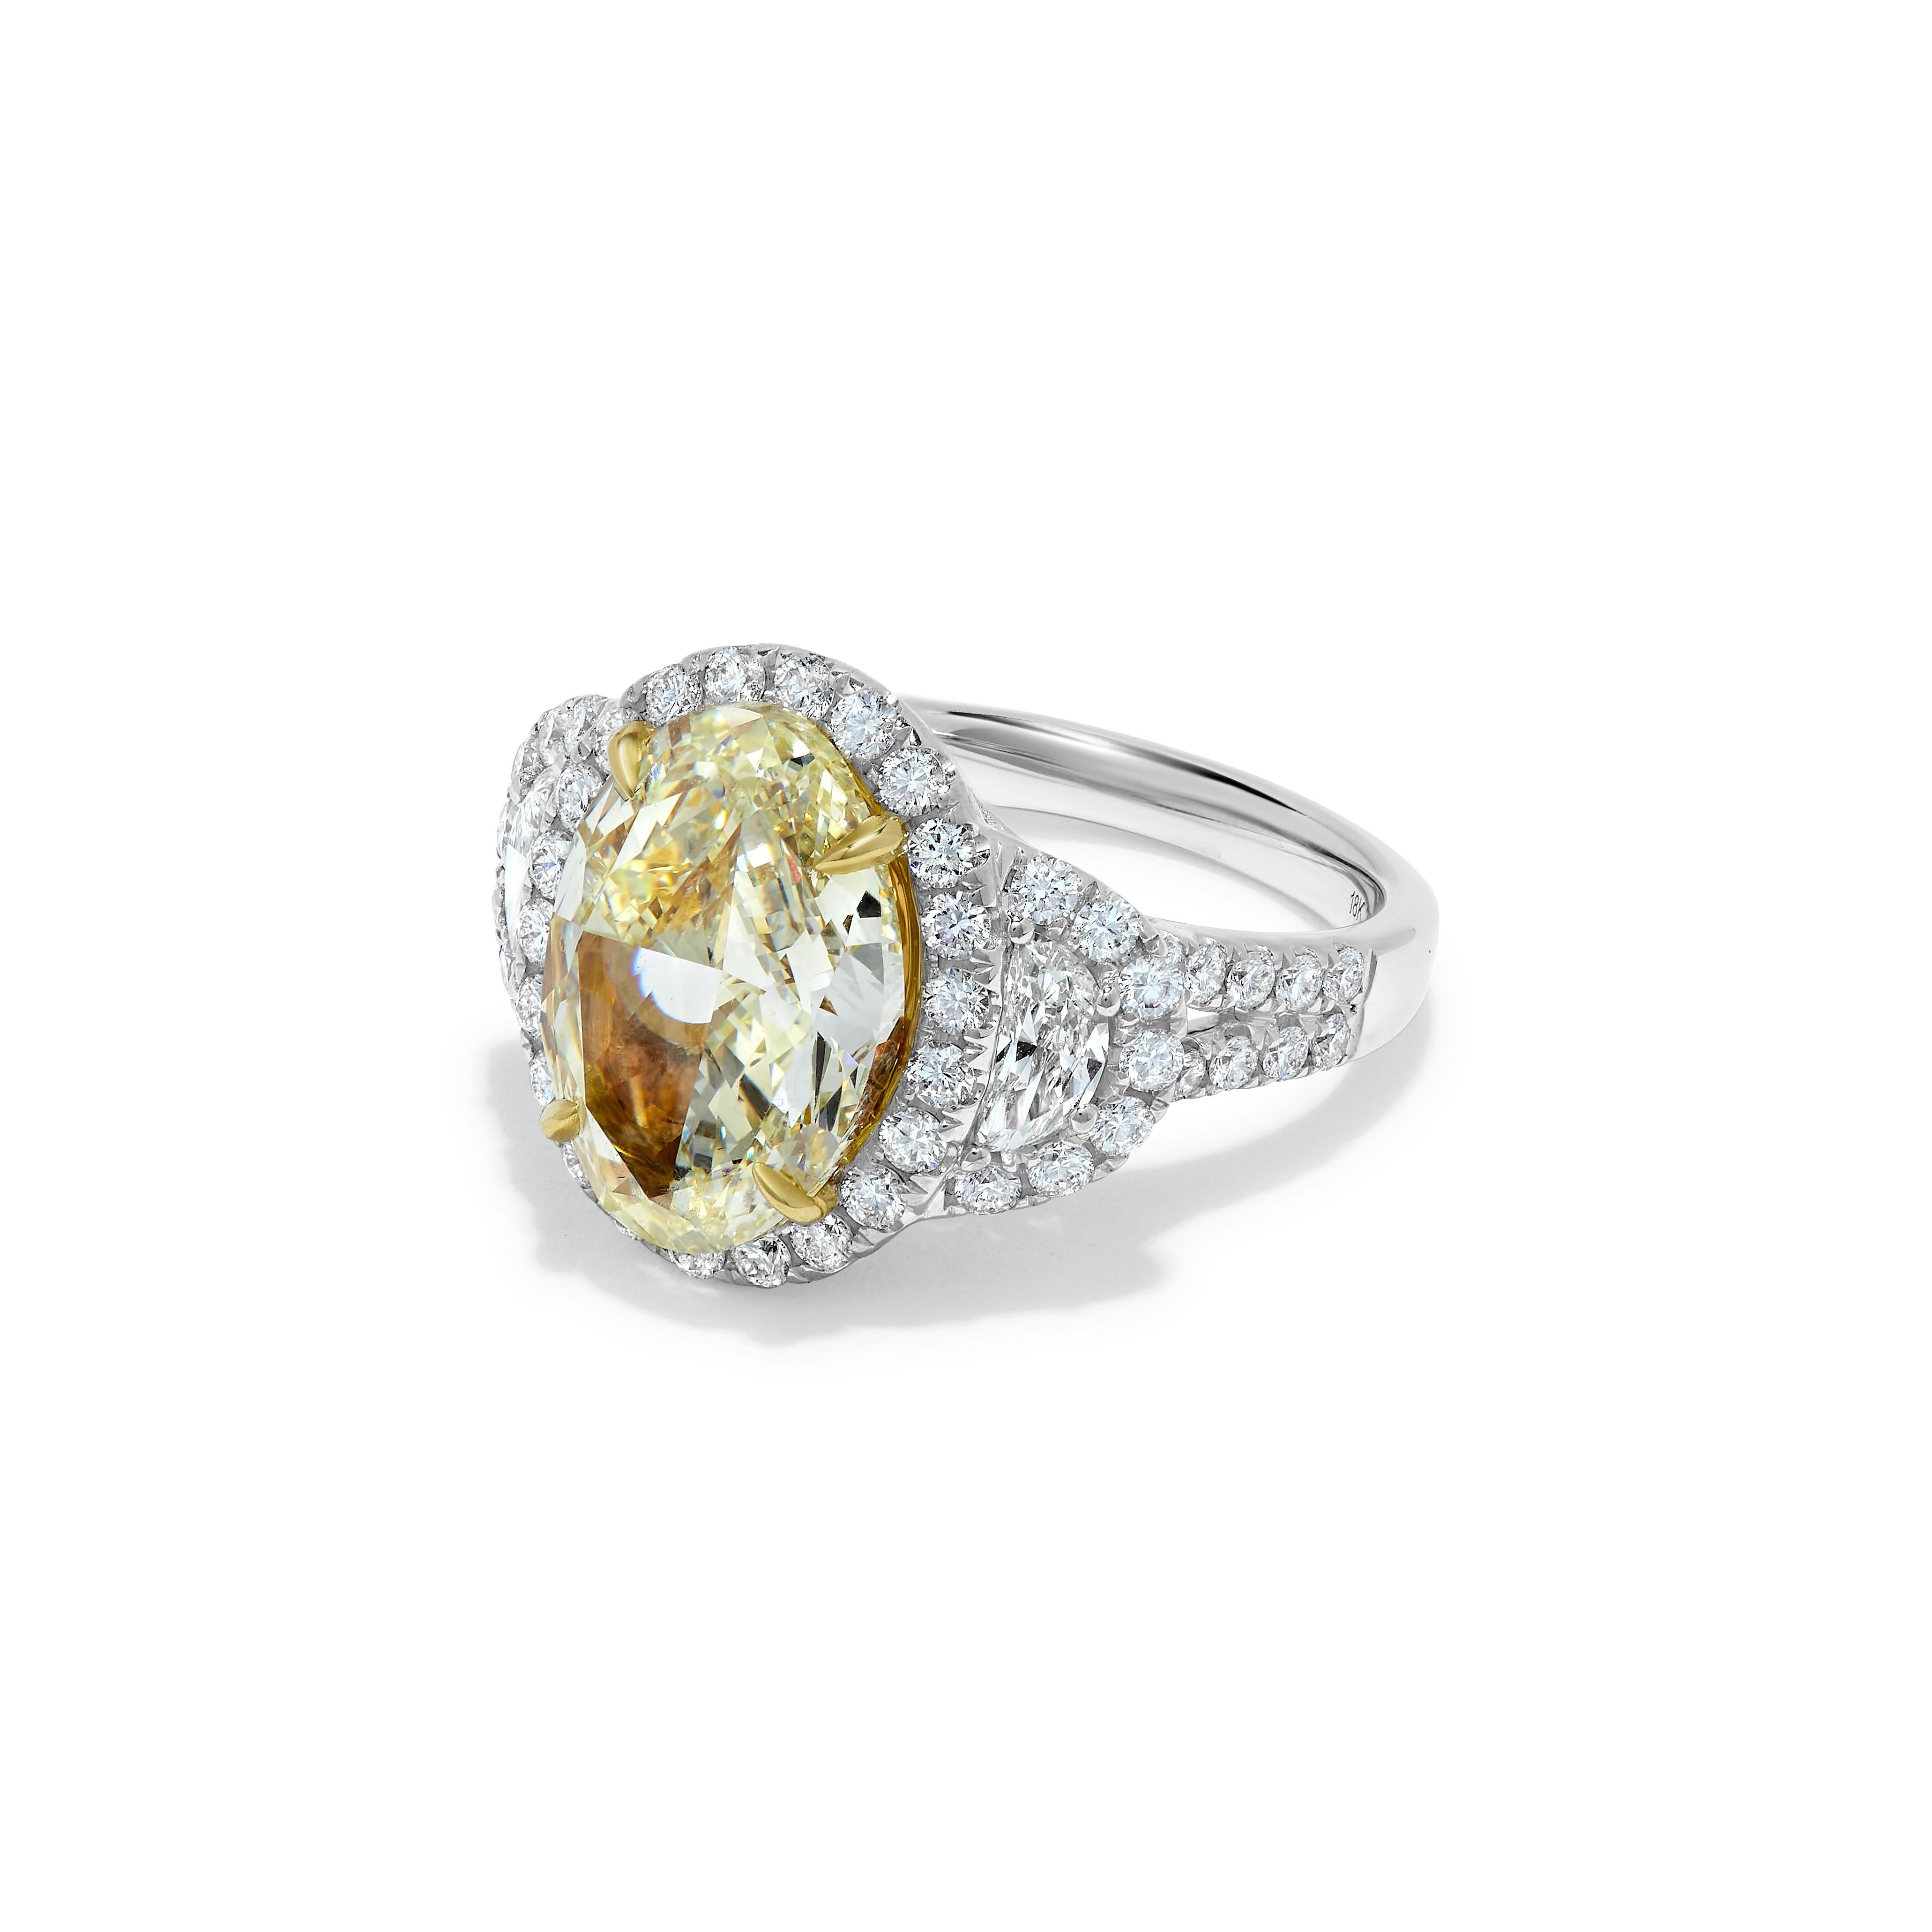 RareGemWorld's classic GIA certified diamond ring. Mounted in a beautiful 18K Yellow and White Gold setting with a natural oval cut yellow diamond. The yellow diamond is surrounded by small round natural white diamond melee and two natural half-moon